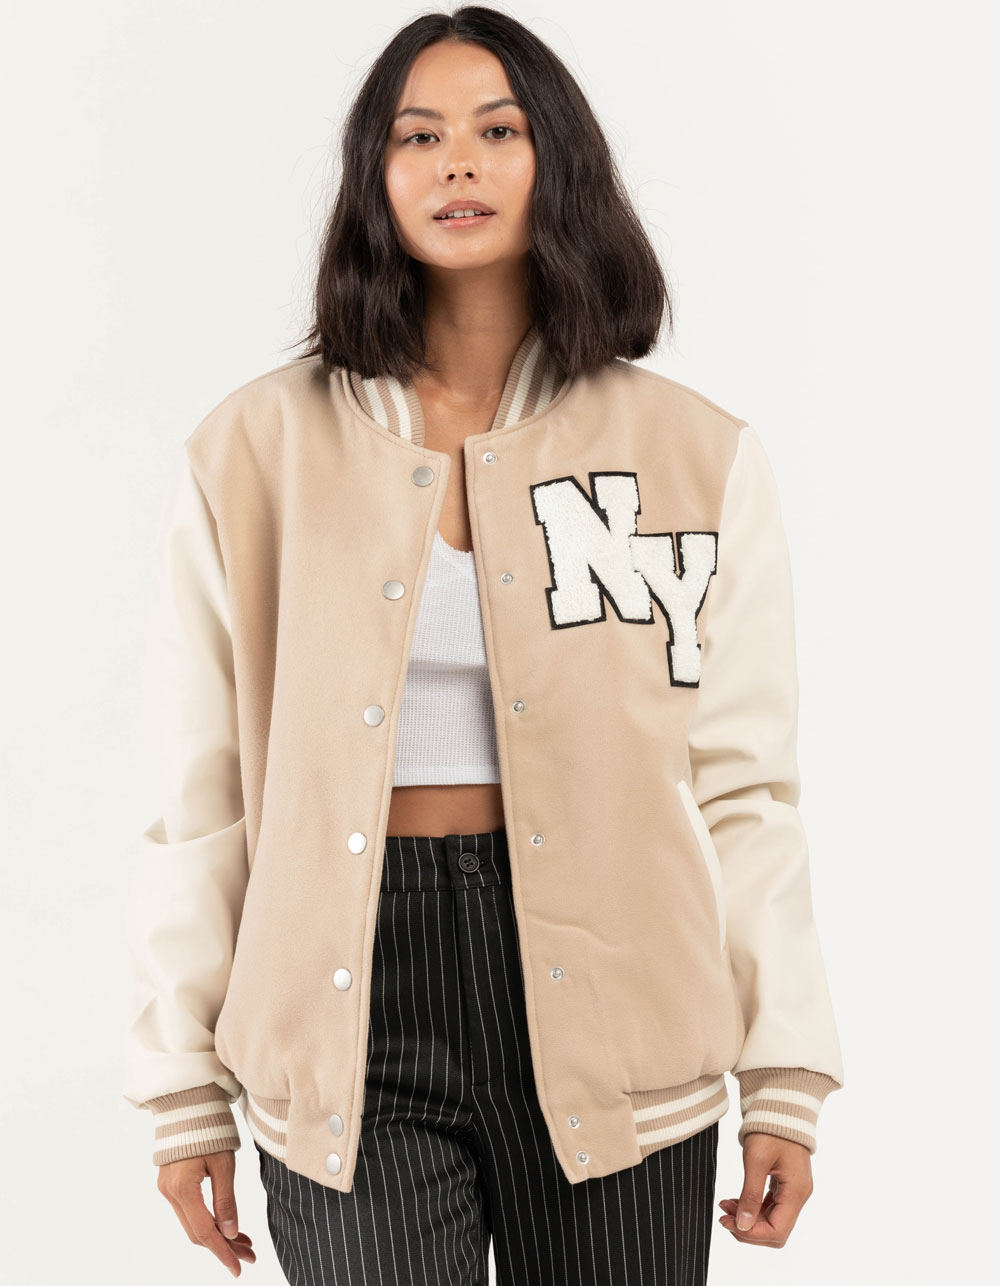 TAUPE(トープ) / Graphical Varsity Jacket